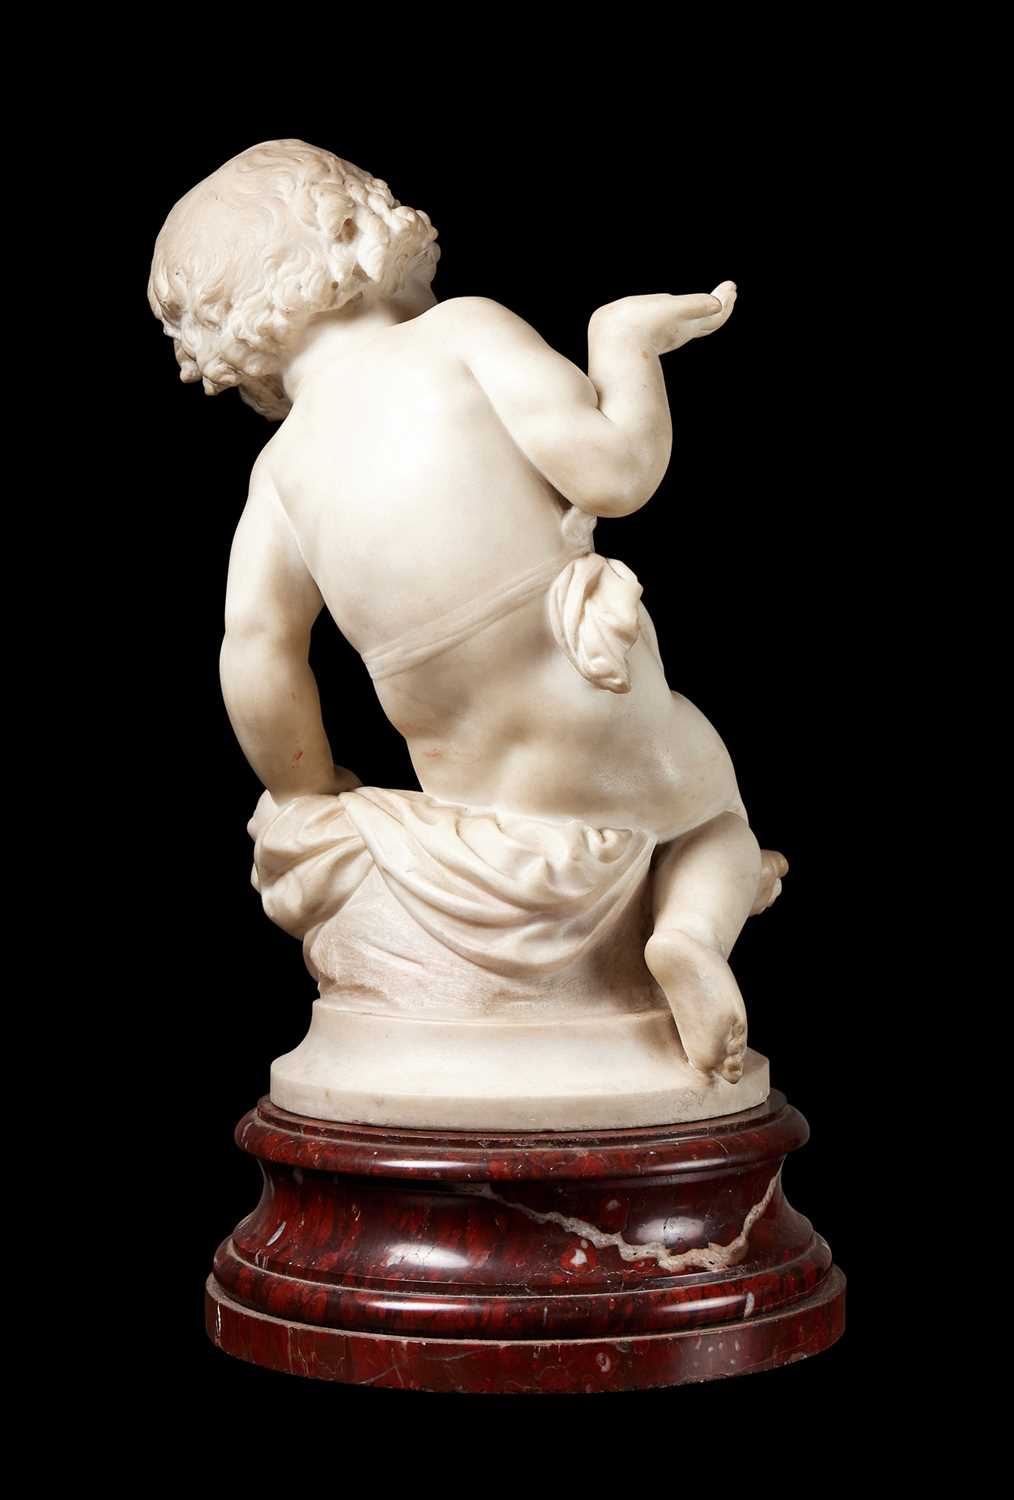 ALBERT CARRIER-BELLEUSE (FRENCH, 1824 -1887): A CARRARA MARBLE PUTTO - Image 2 of 11